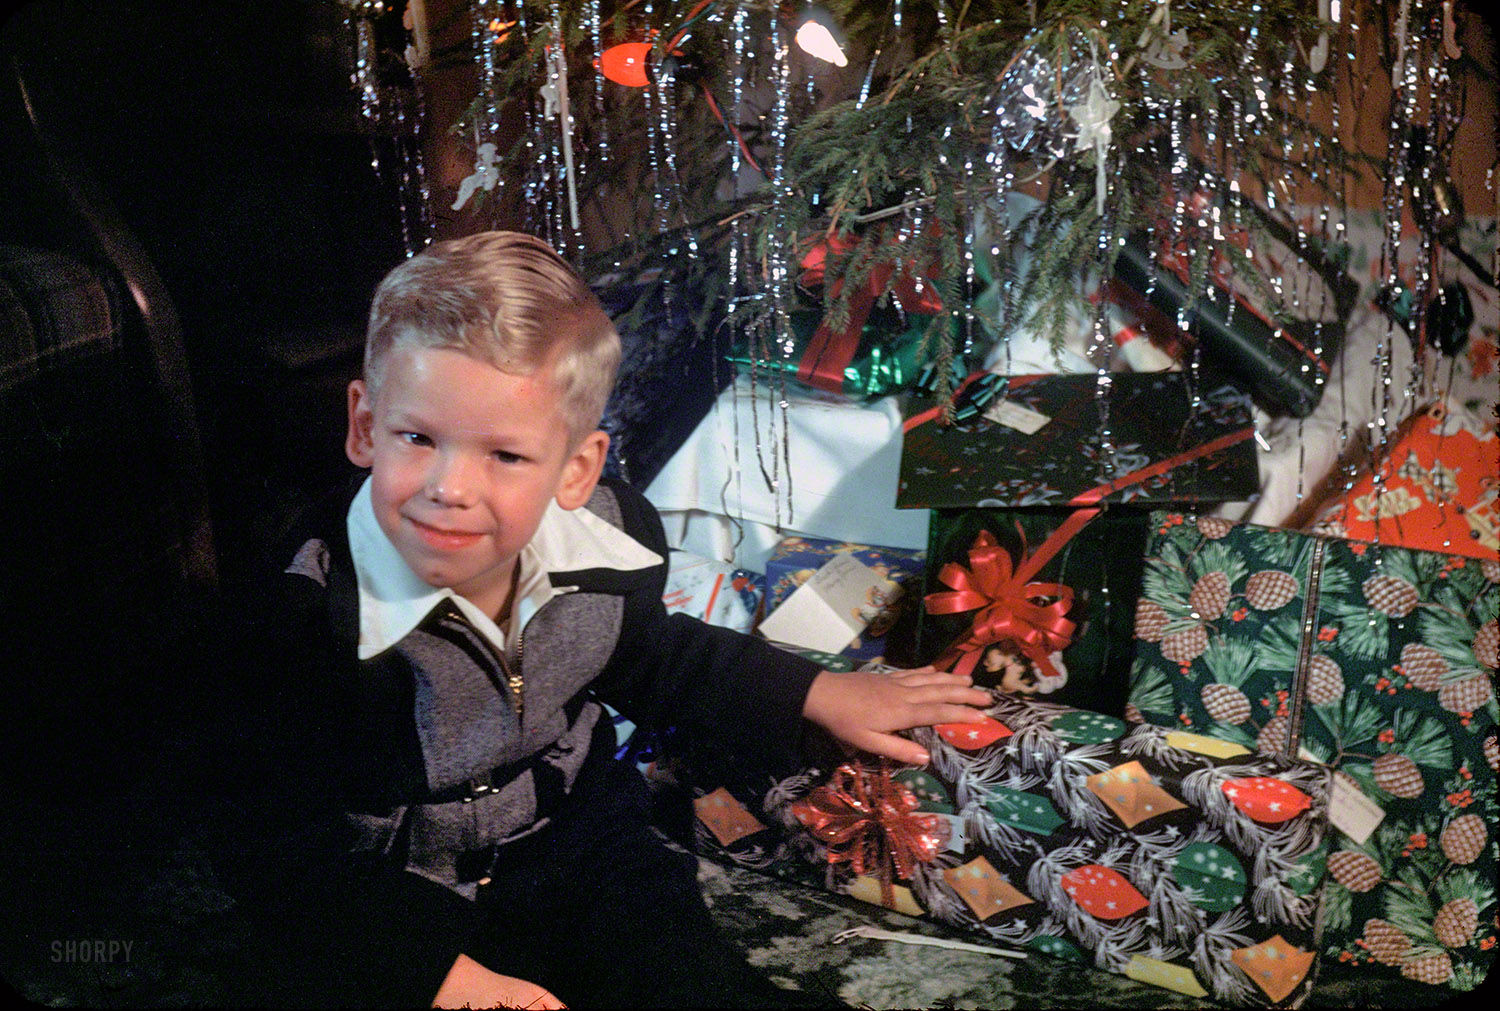 "Xmas 1951." Our golden boy is back in this 13th example from a series of Kodachromes taken in the crook of the Lower Michigan mitten. Whatever is in there, we hope it's better than Dad's leg lamp. View full size.